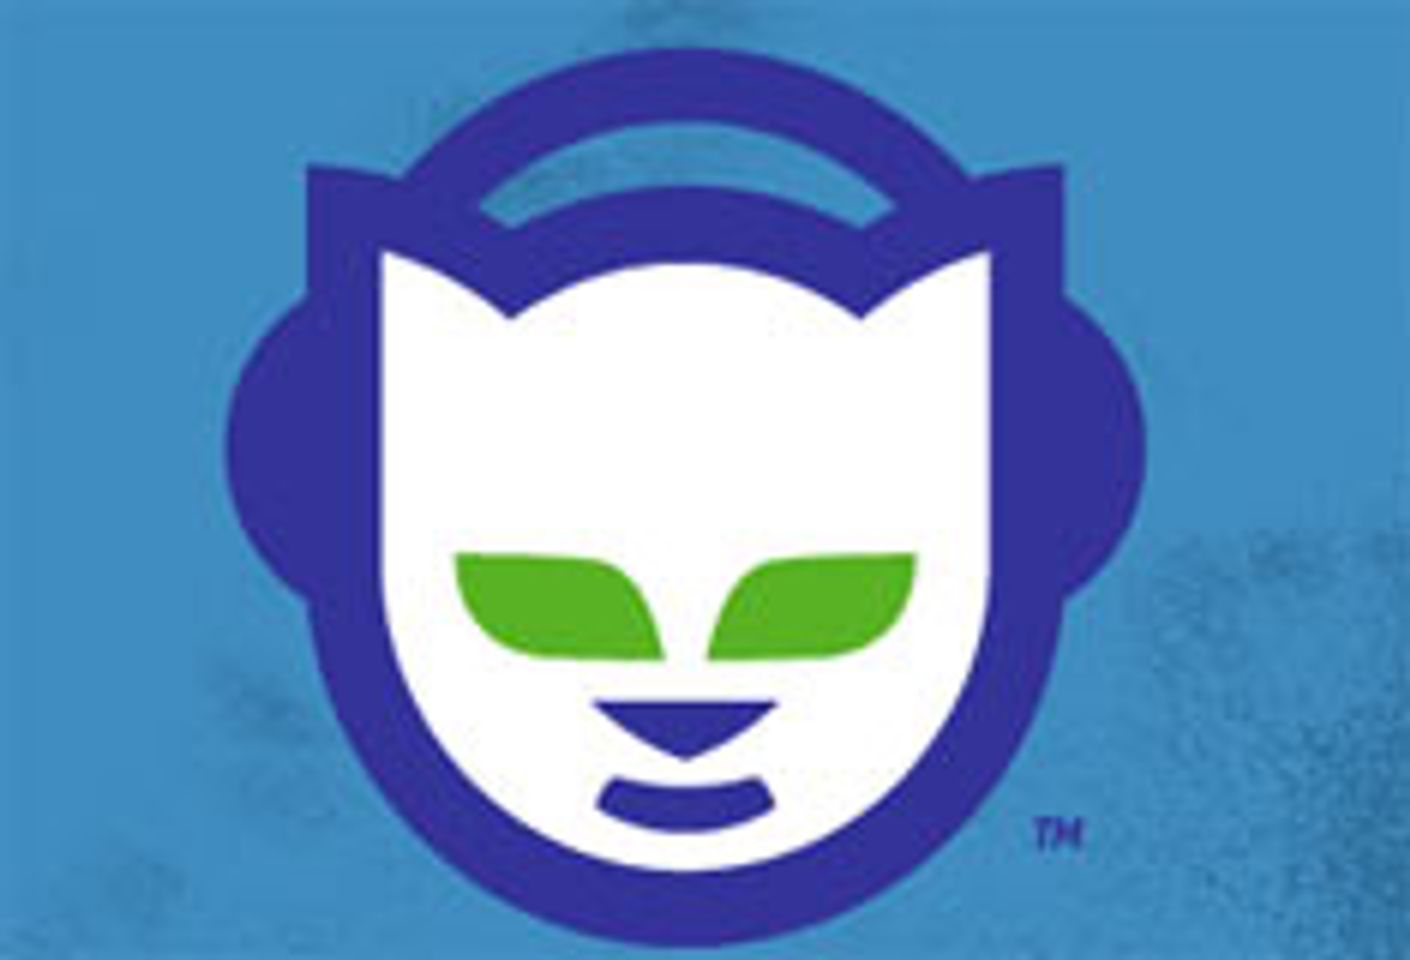 Napster In The Crapster?